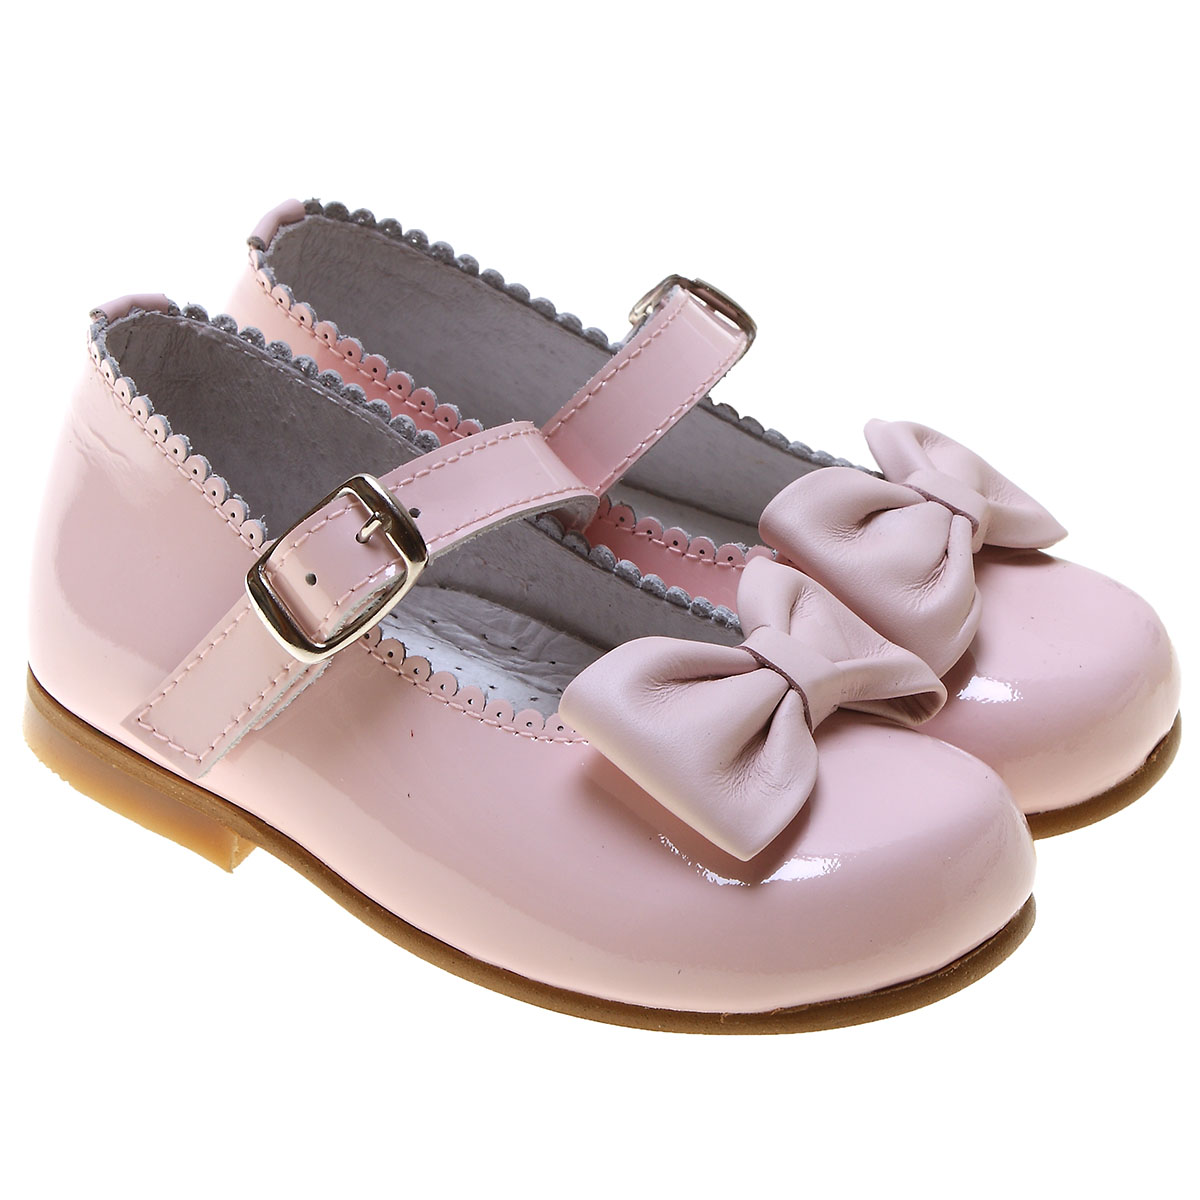 Girls Pink Mary Jane Shoes Scallop Bow Patent Cachet Kids